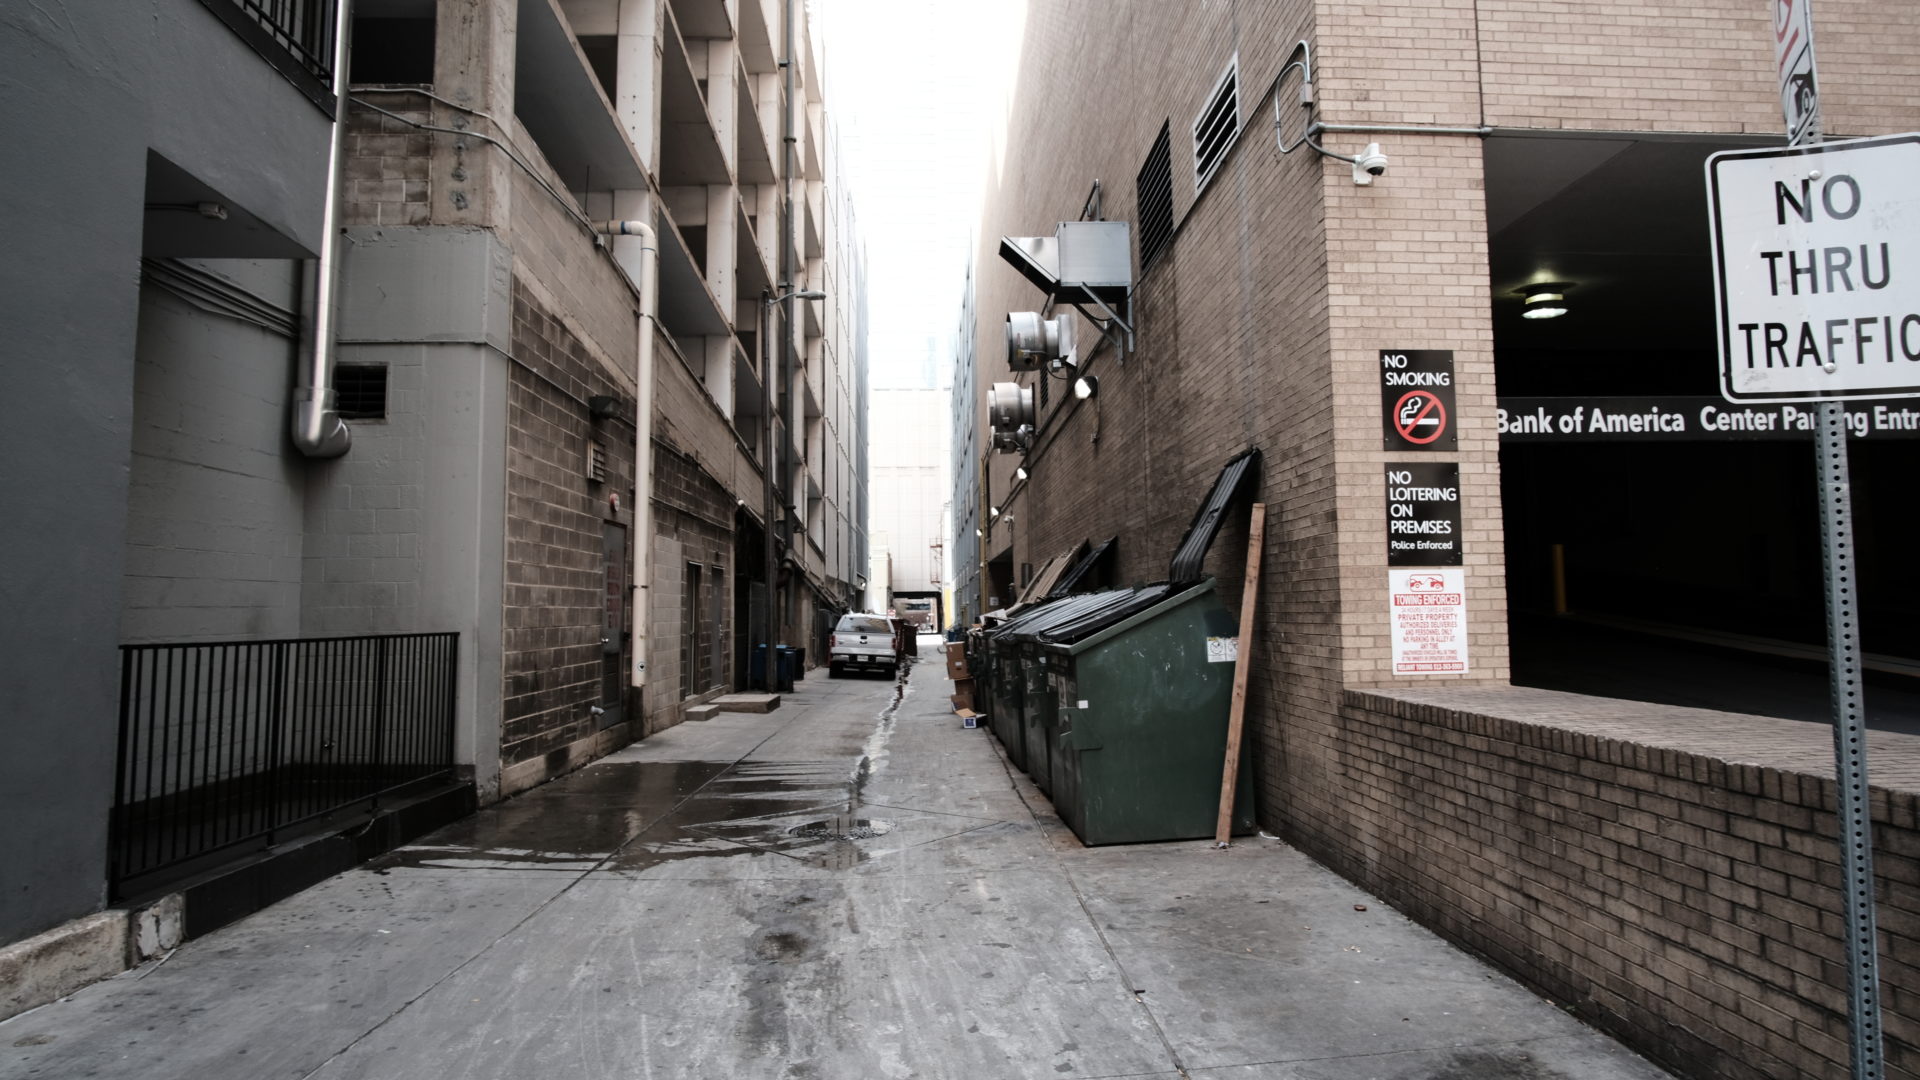 An alley lined with garbage dumpsters in Austin, Texas